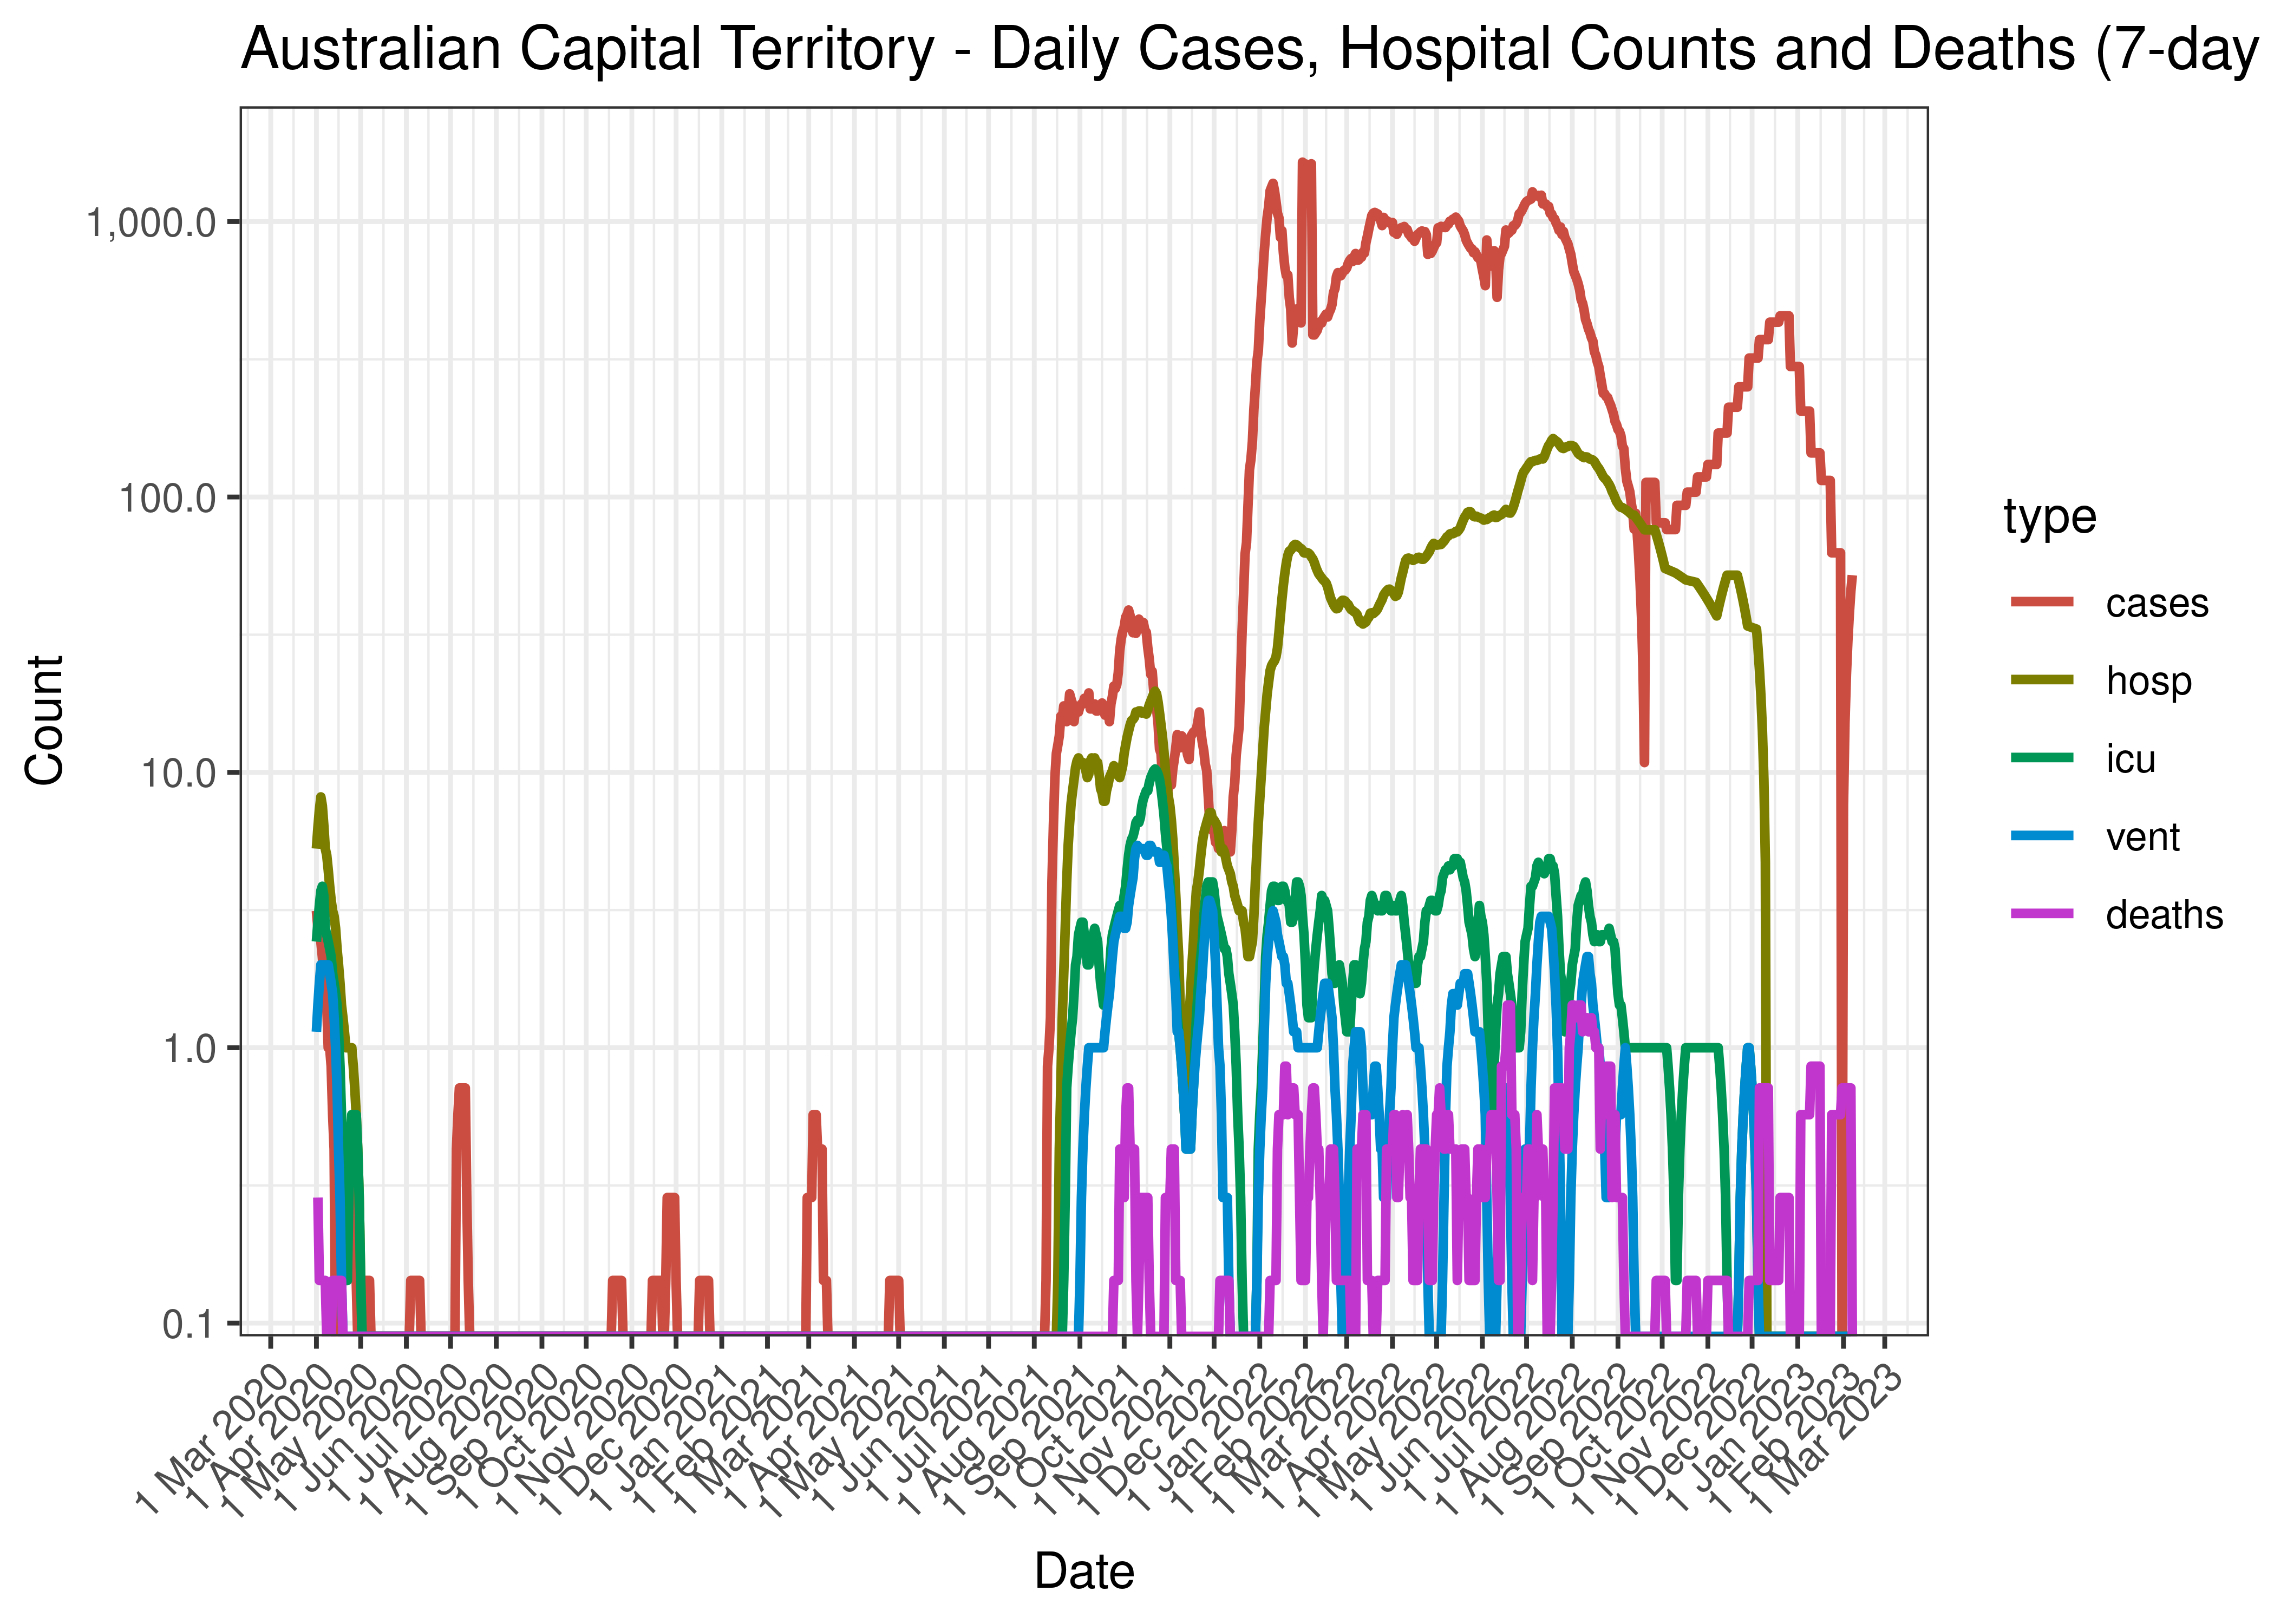 Australian Capital Territory - Daily Deaths (7-day moving average)